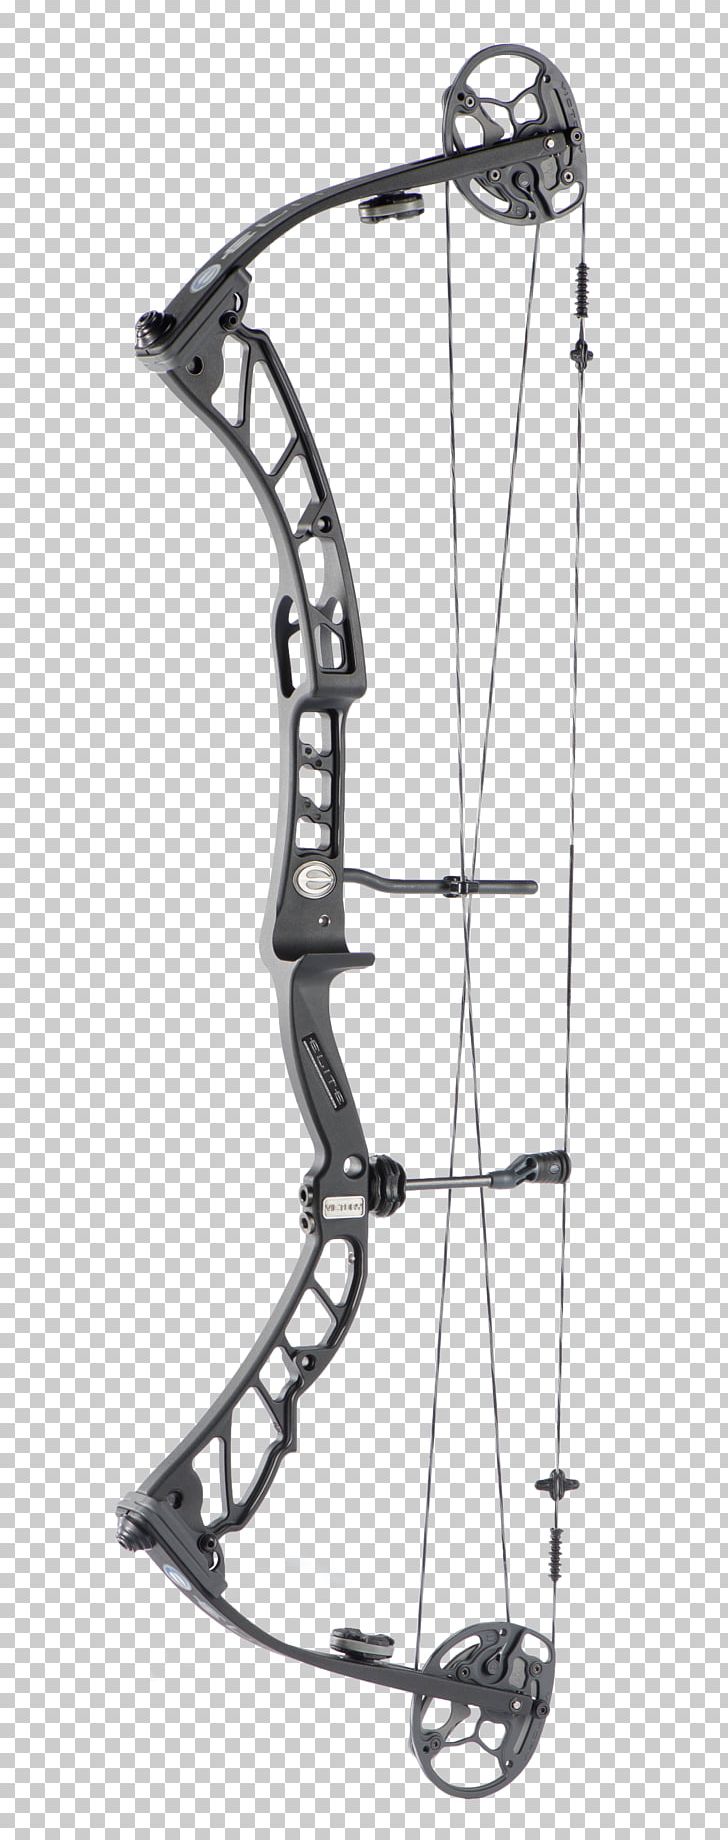 Compound Bows Bow And Arrow Archery Bowhunting PNG, Clipart, Archery, Arrow, Barebow, Black And White, Bow Free PNG Download